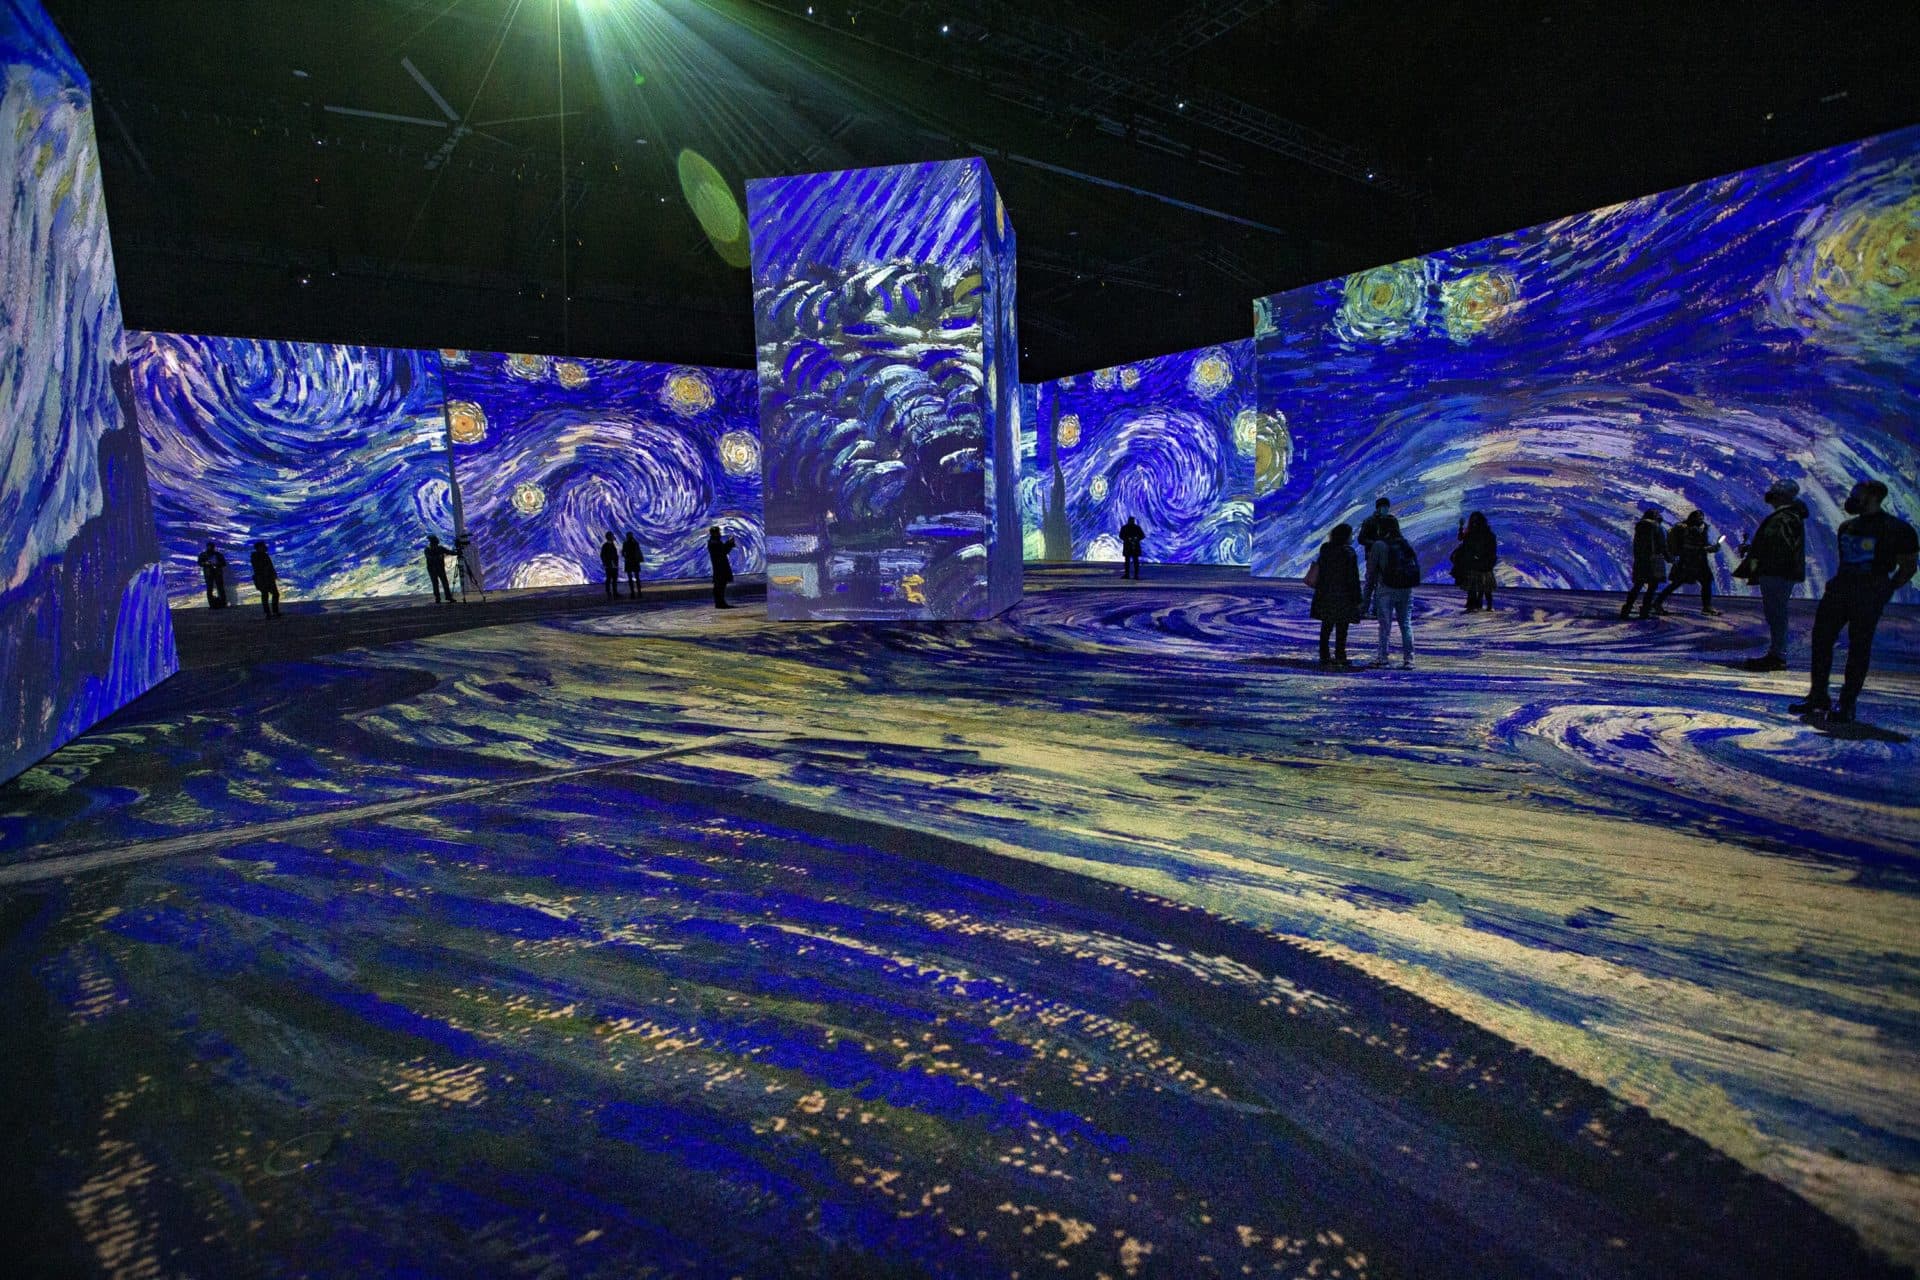 Projections of Vincent van Gogh’s &quot;The Starry Night&quot; flood the walls and floor and surround members of the media as they experience the press preview of “Imagine Van Gogh” at the SoWa Power Station in the South End. (Jesse Costa/WBUR)